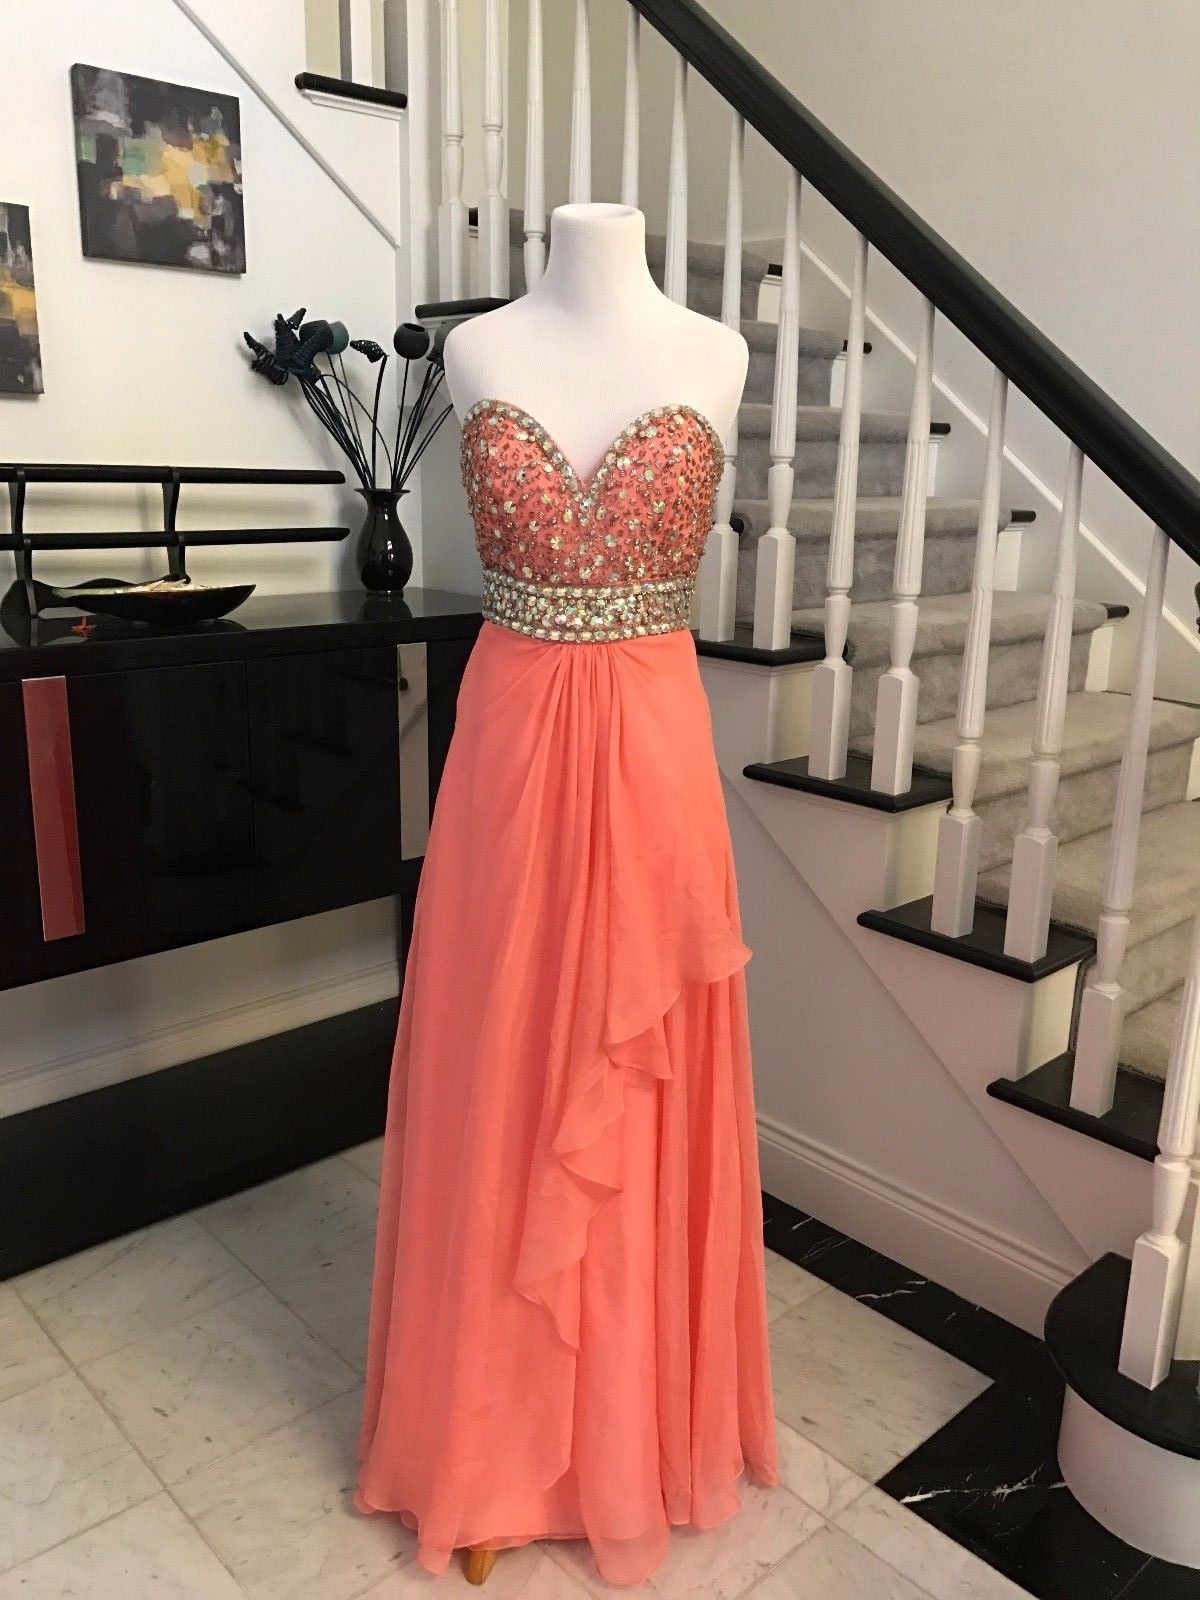 Sparkly Coral Prom Dresses Sweetheart Beaded Chiffon Prom Gowns 2017 Party Evening Dress For Women